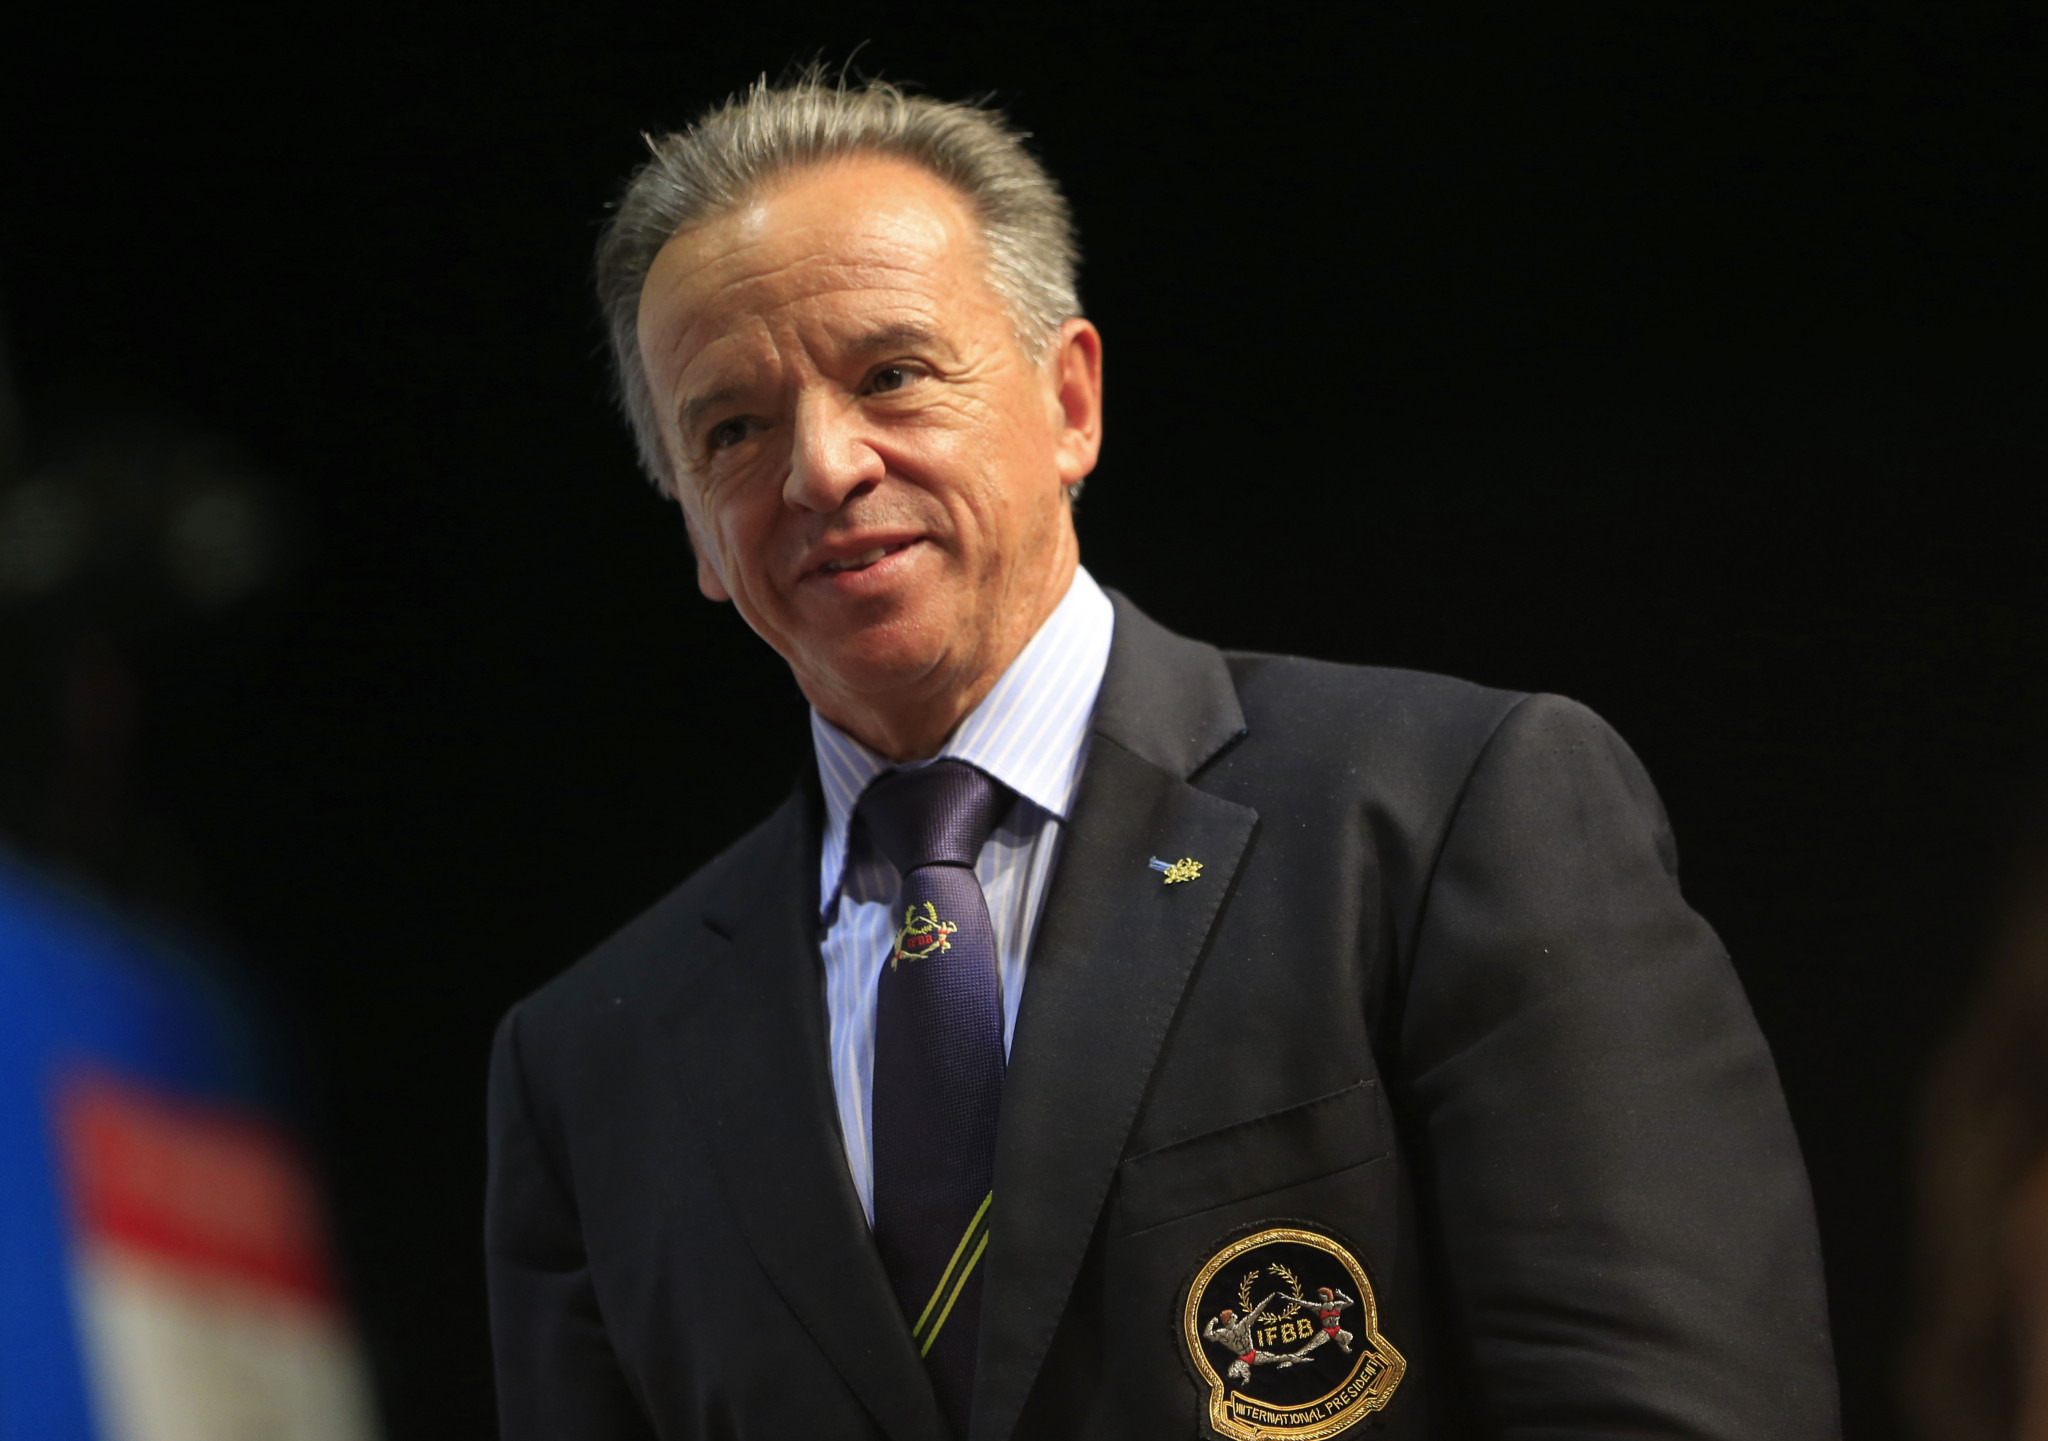 Exclusive: Santonja will run unopposed for fourth term as IFBB President